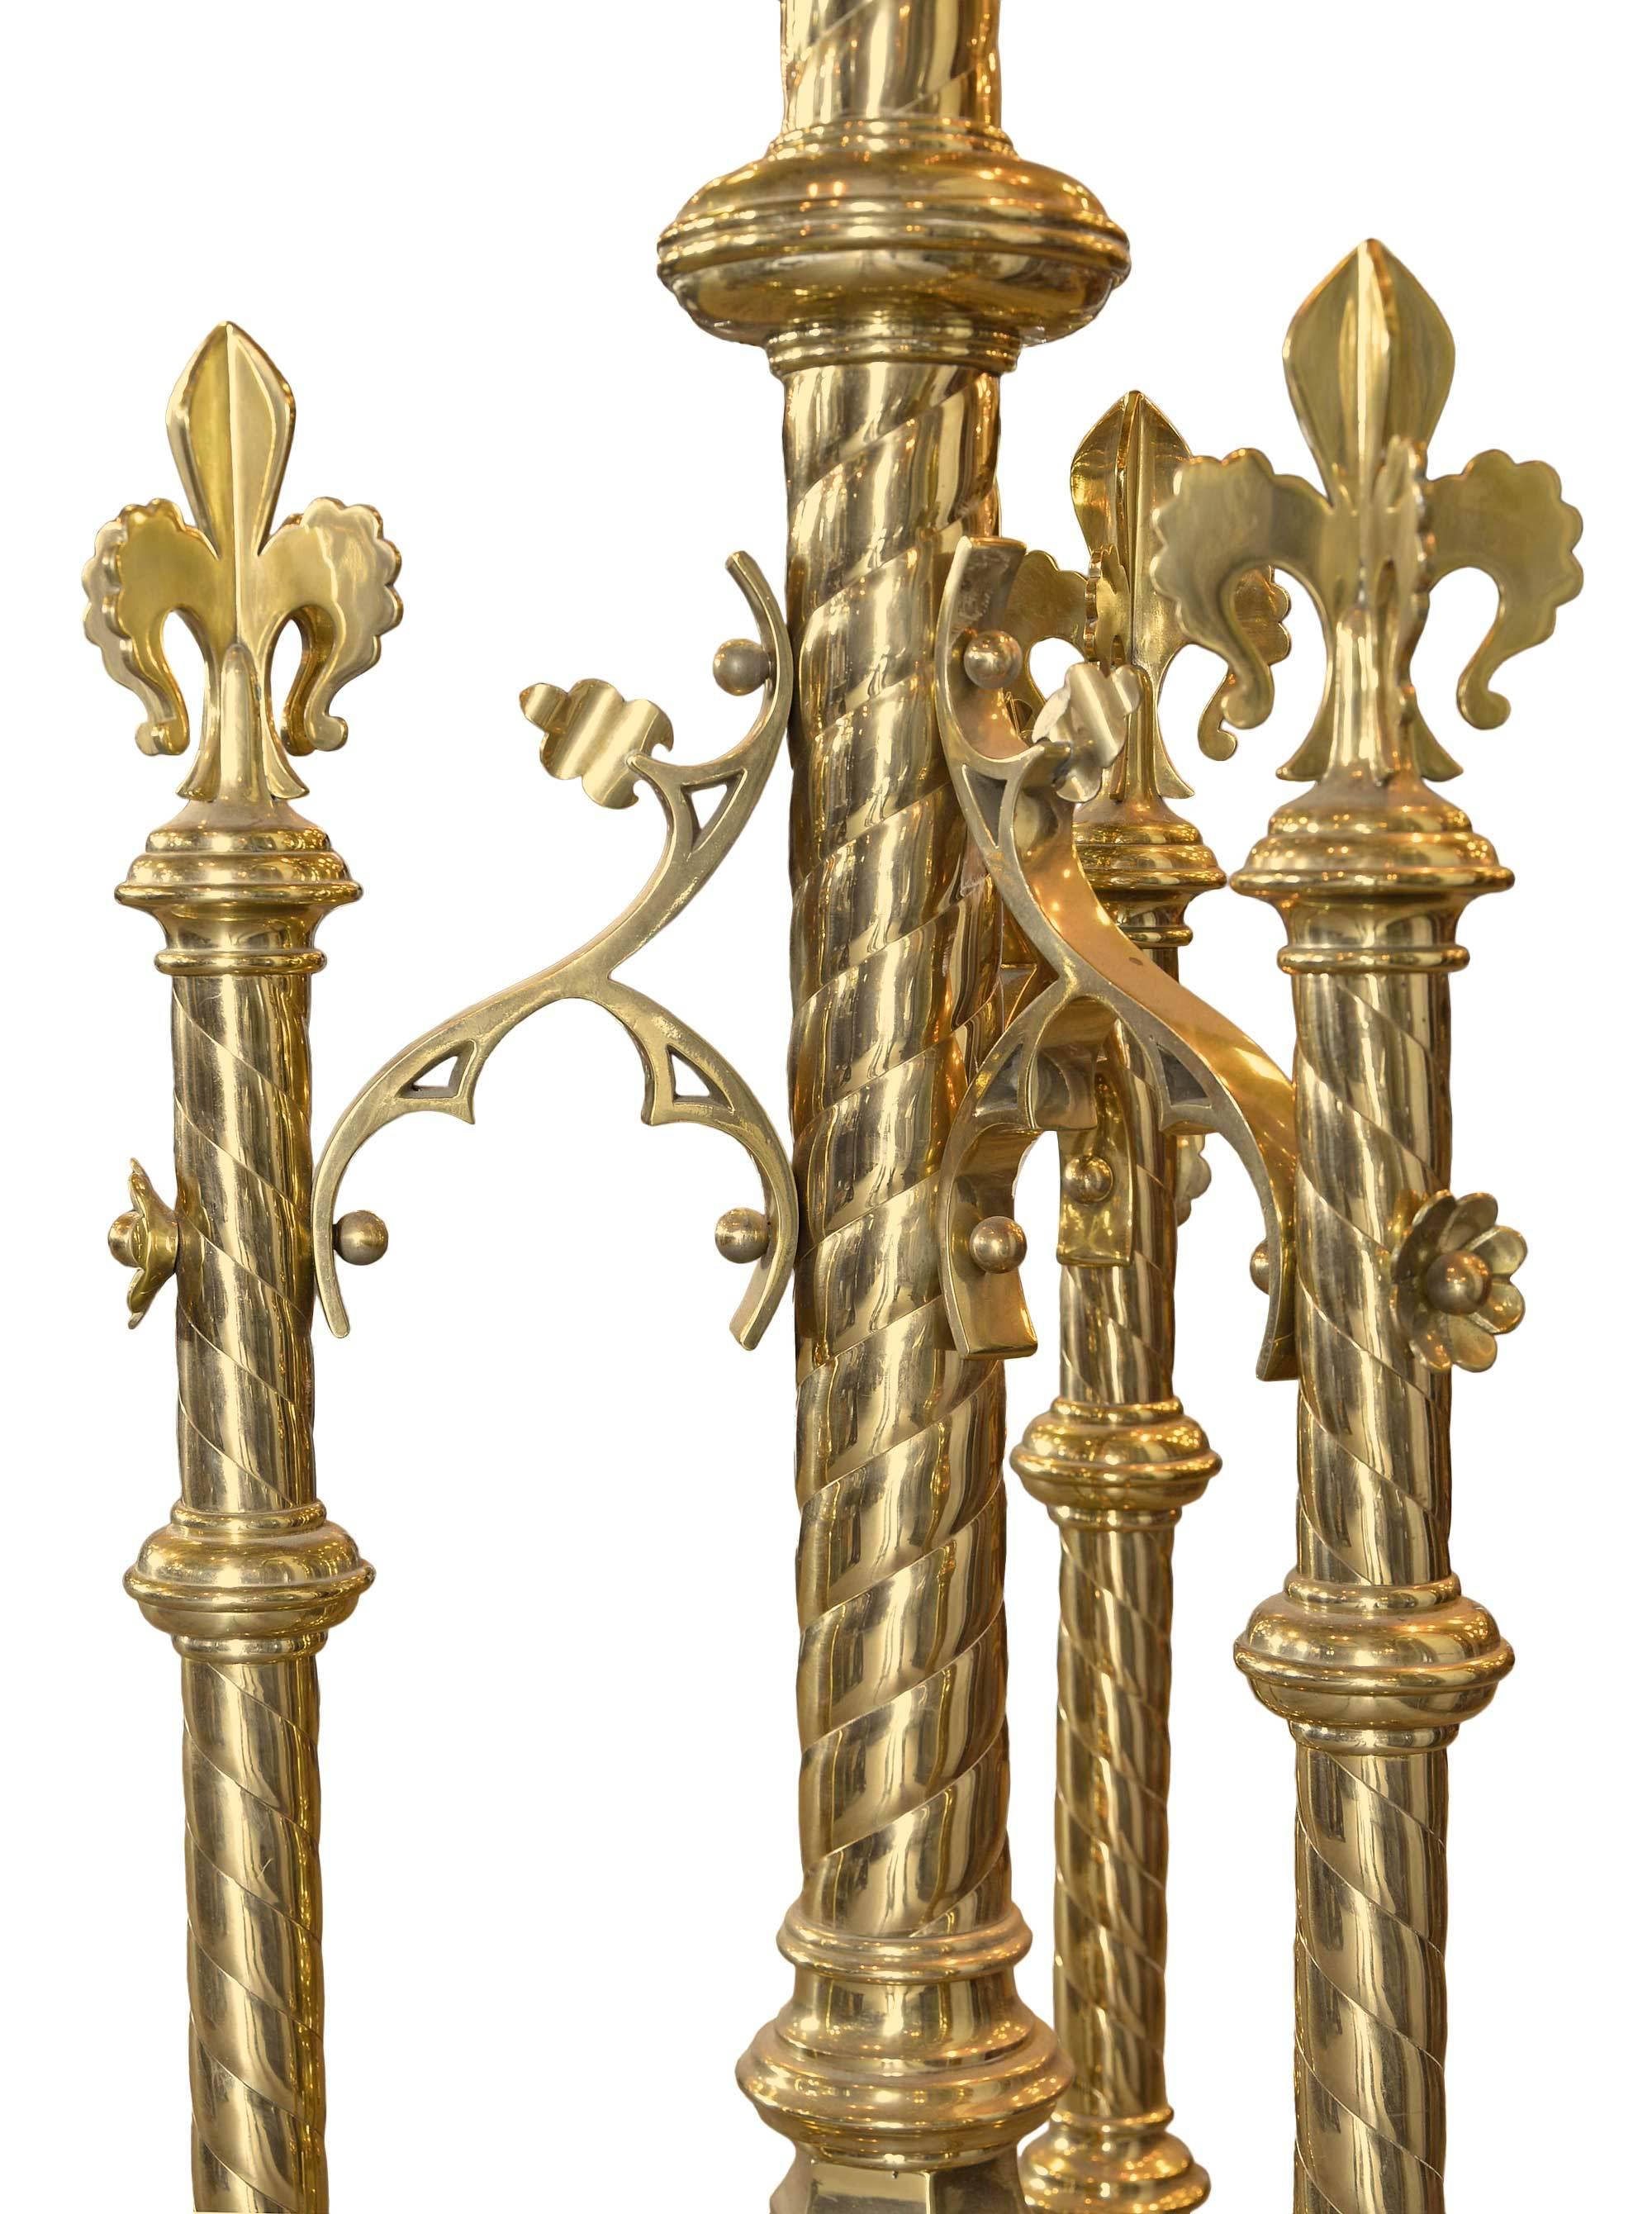 Ornate brass lectern with stylized three-dimensional fleur-de-lis, quatrefoil cut-outs with crosses, and twisted rods and scroll details, featuring engraved Christogram and inscription.